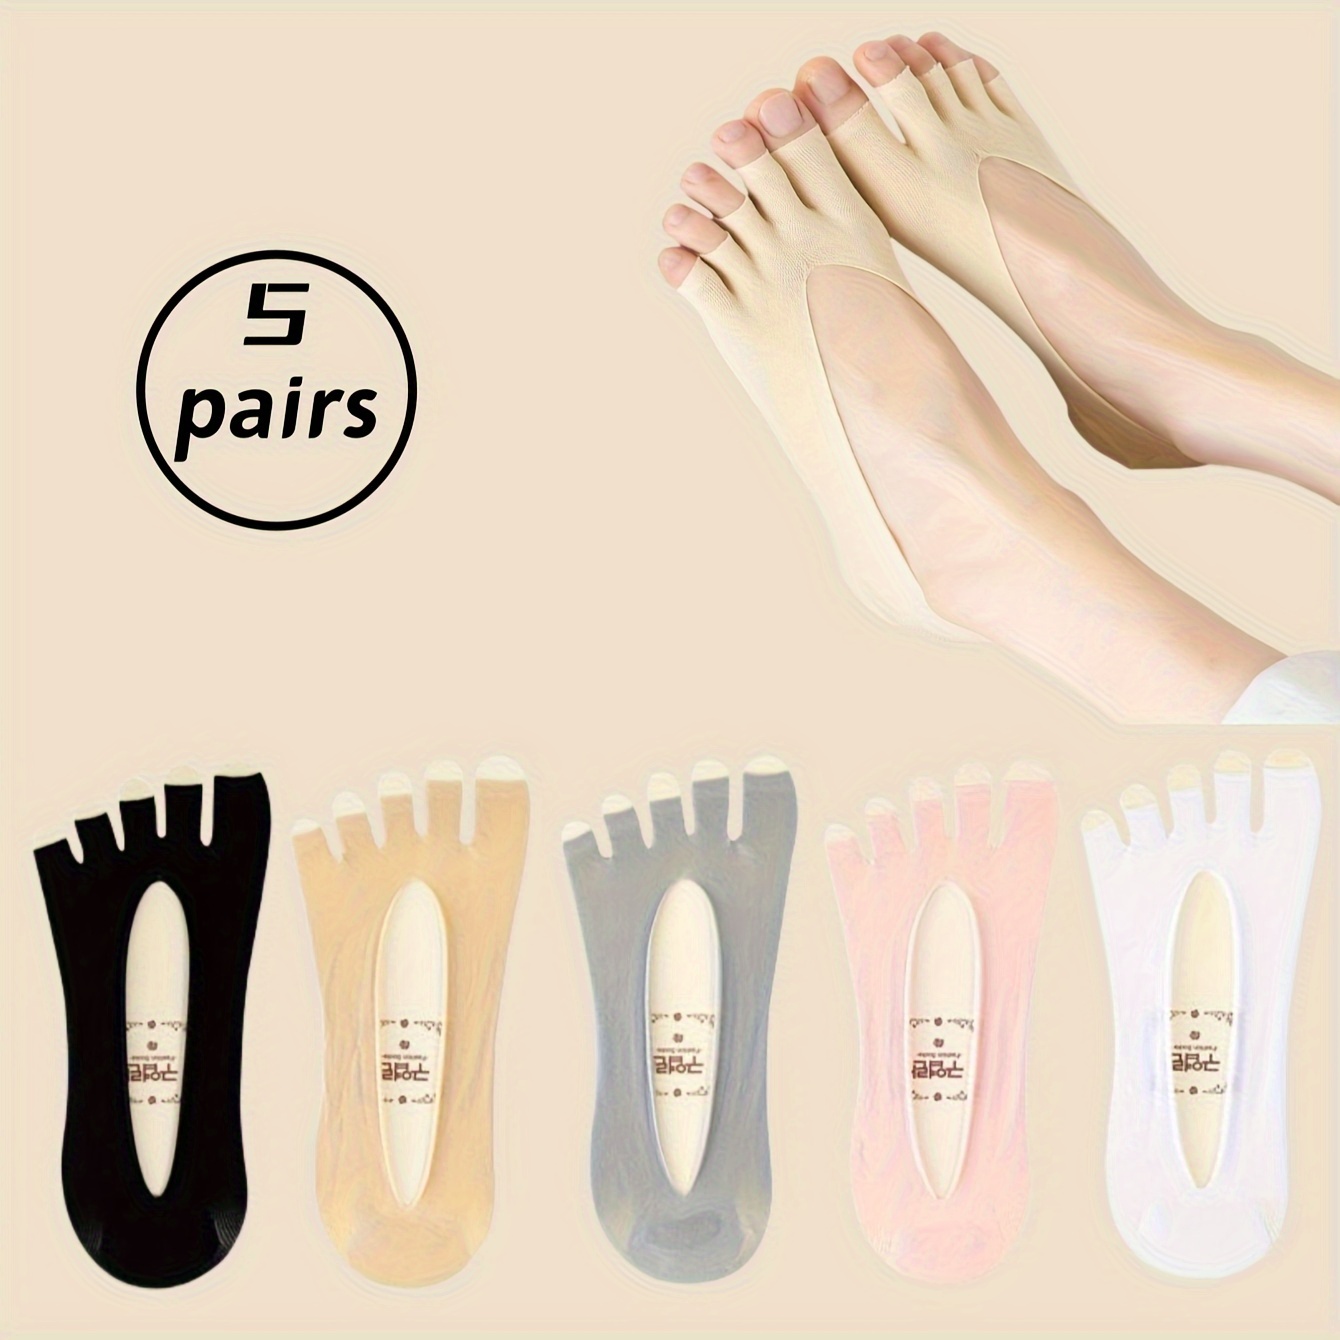 

5 Pairs Low Cut Toeless Socks, Silicone Non-slip Ultra-thin Invisible Socks, Women's Stockings & Hosiery